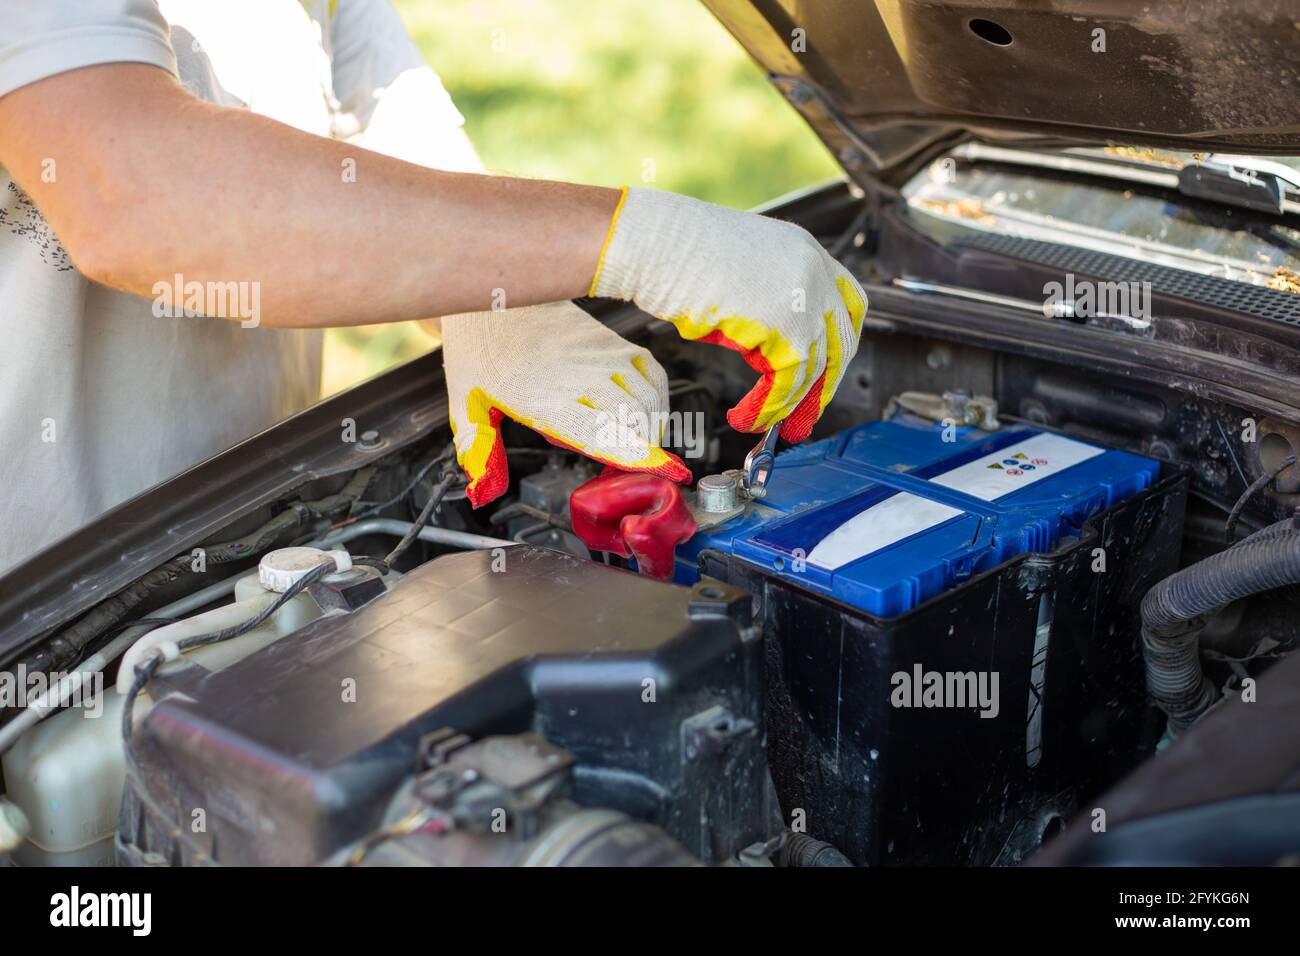 Man unscrews the battery mounting bolts with a wrench, installing and replacing spare parts on a car. Stock Photo